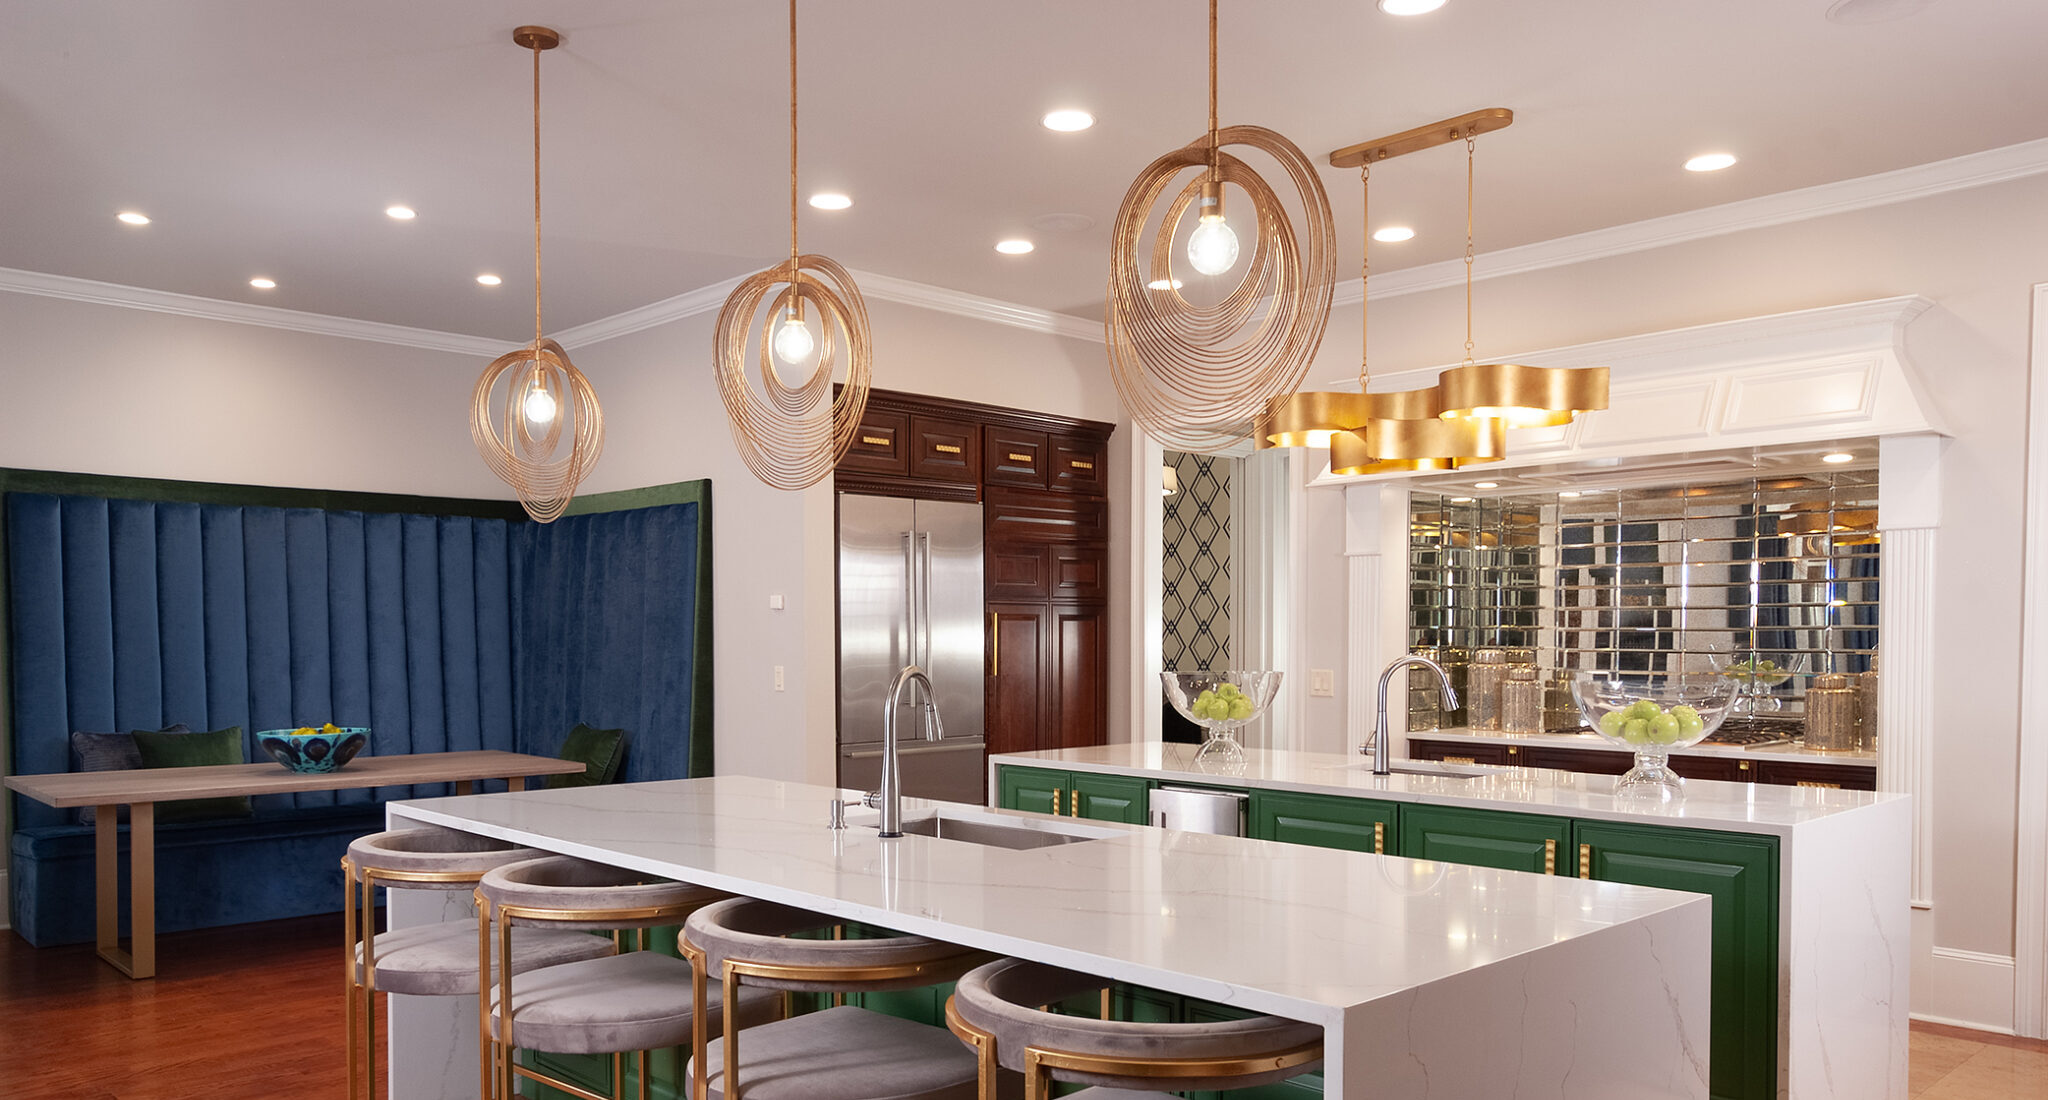 Here’s a Bright Idea: Use Statement Lighting in Your Home